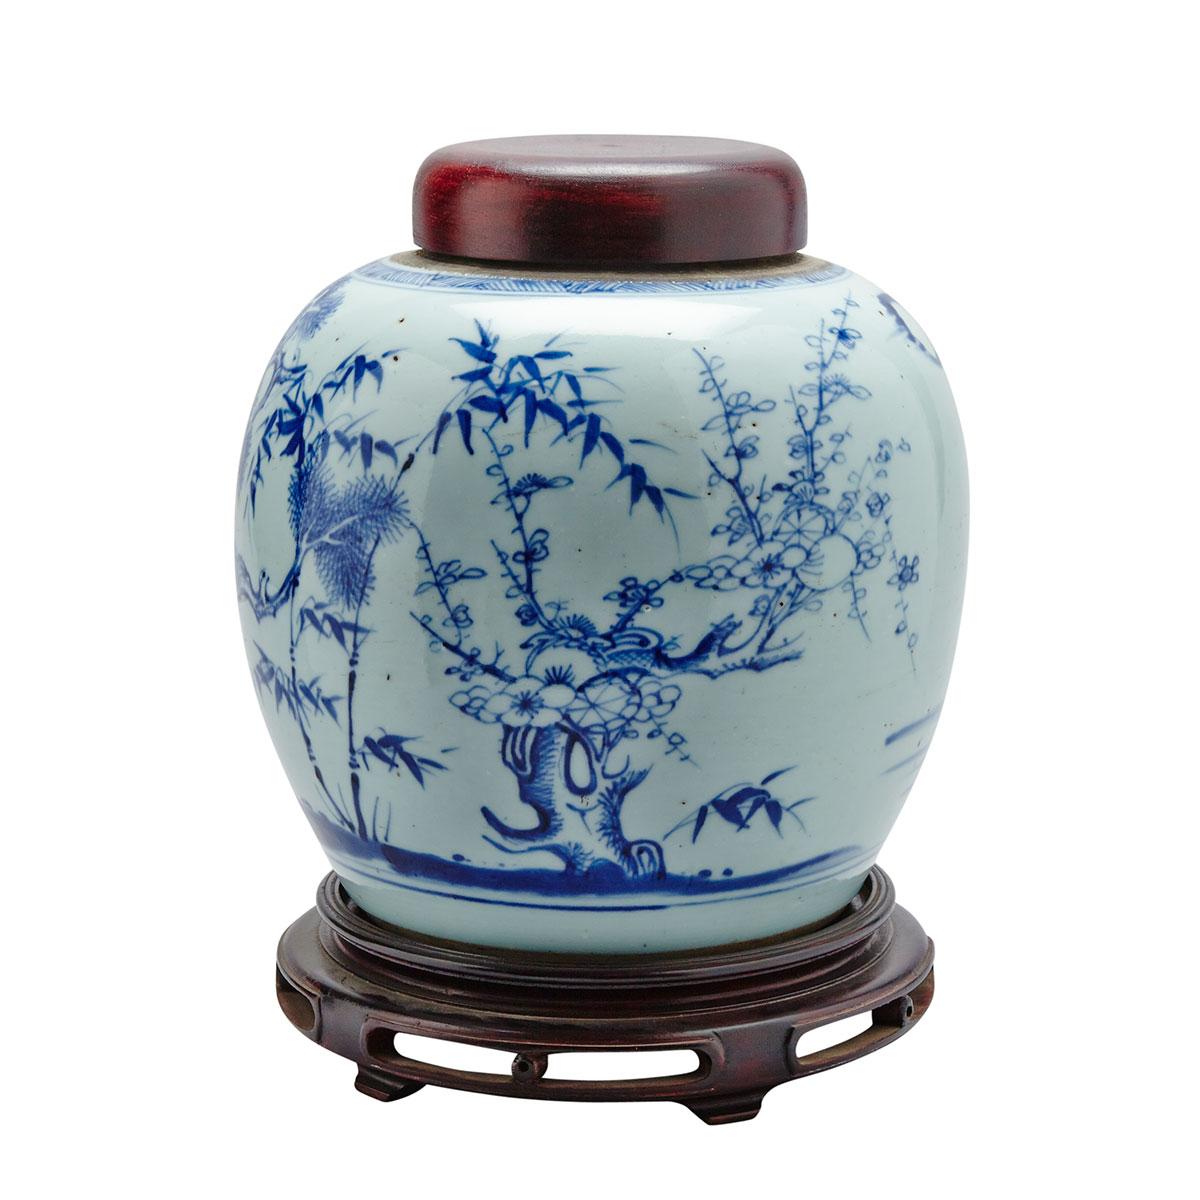 Unusual Export Blue and White ‘Three Friends’ Ginger Jar, Kangxi Period (1662-1722)